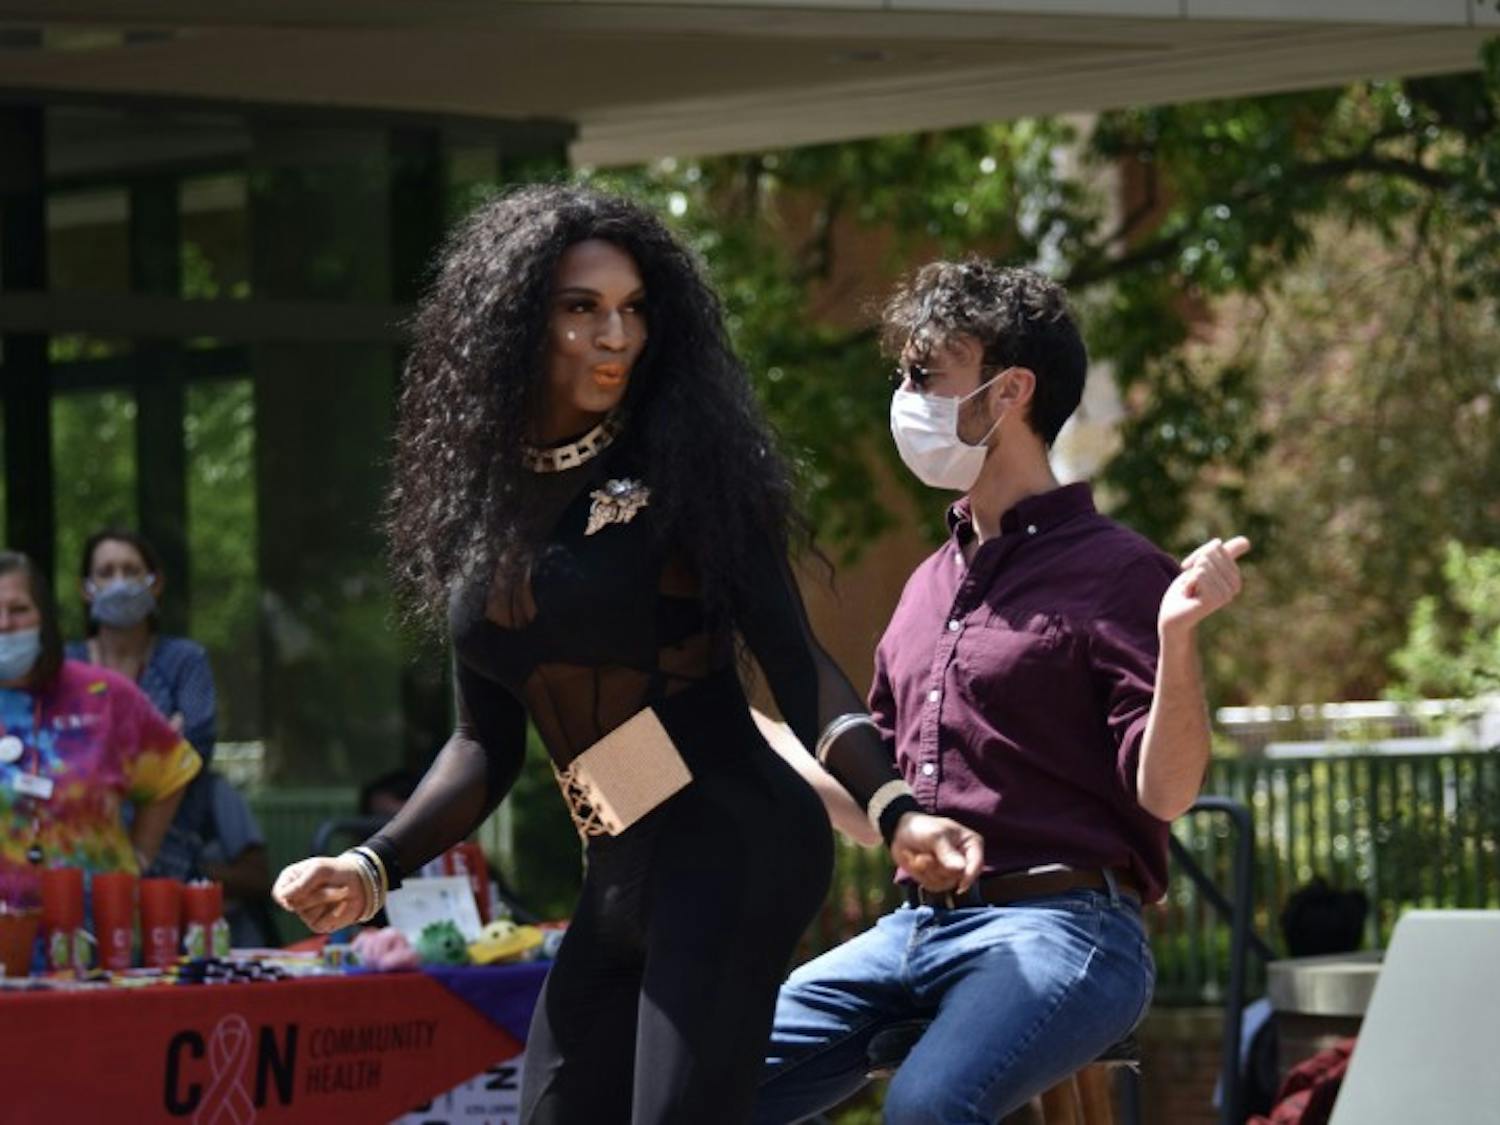 Drag queen Ava Drew Braxton invites a member of her audience at Pridechella to the center of the event.